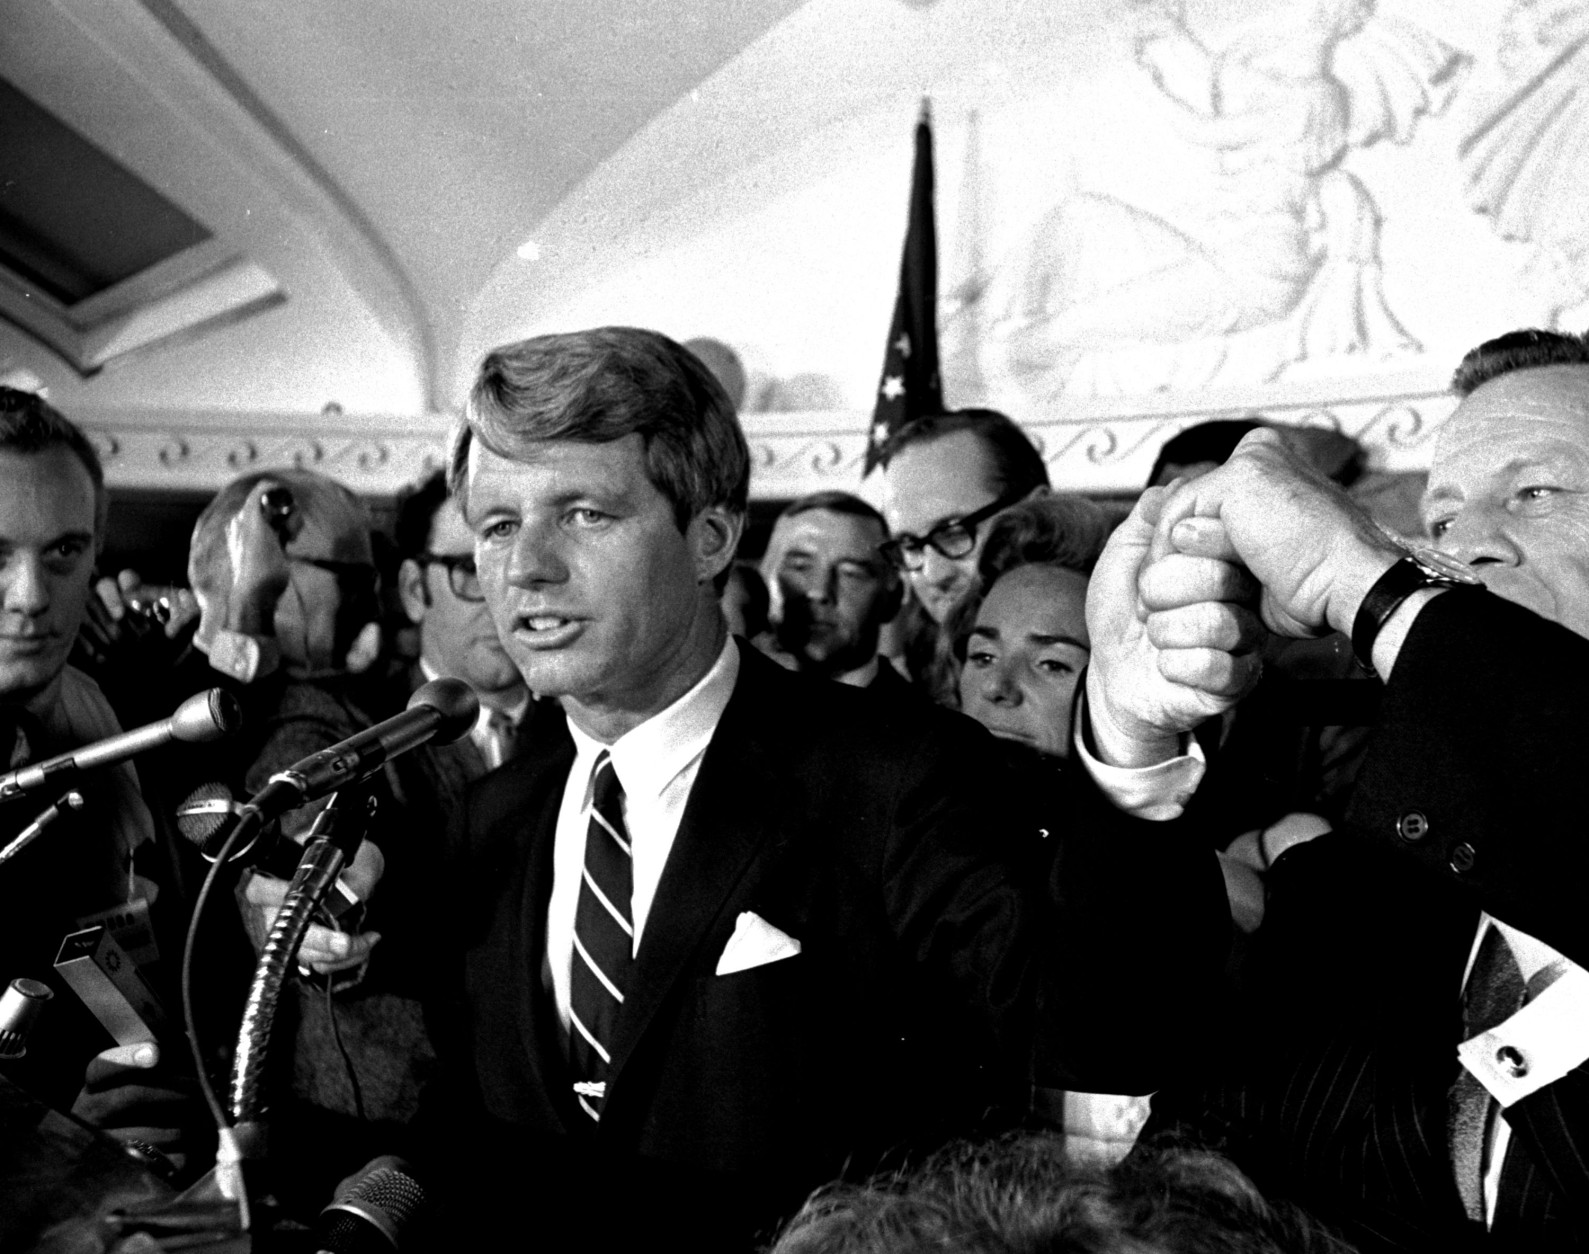 Sen. Robert F. Kennedy addresses a throng of supporters in the Ambassador Hotel in Los Angeles early in the morning of June 5, 1968, following his victory in the previous day's California primary election.  A moment later he turned into a hotel kitchen corridor and was critically wounded.  His wife, Ethel, is just behind him.  (AP Photo/Dick Strobel)